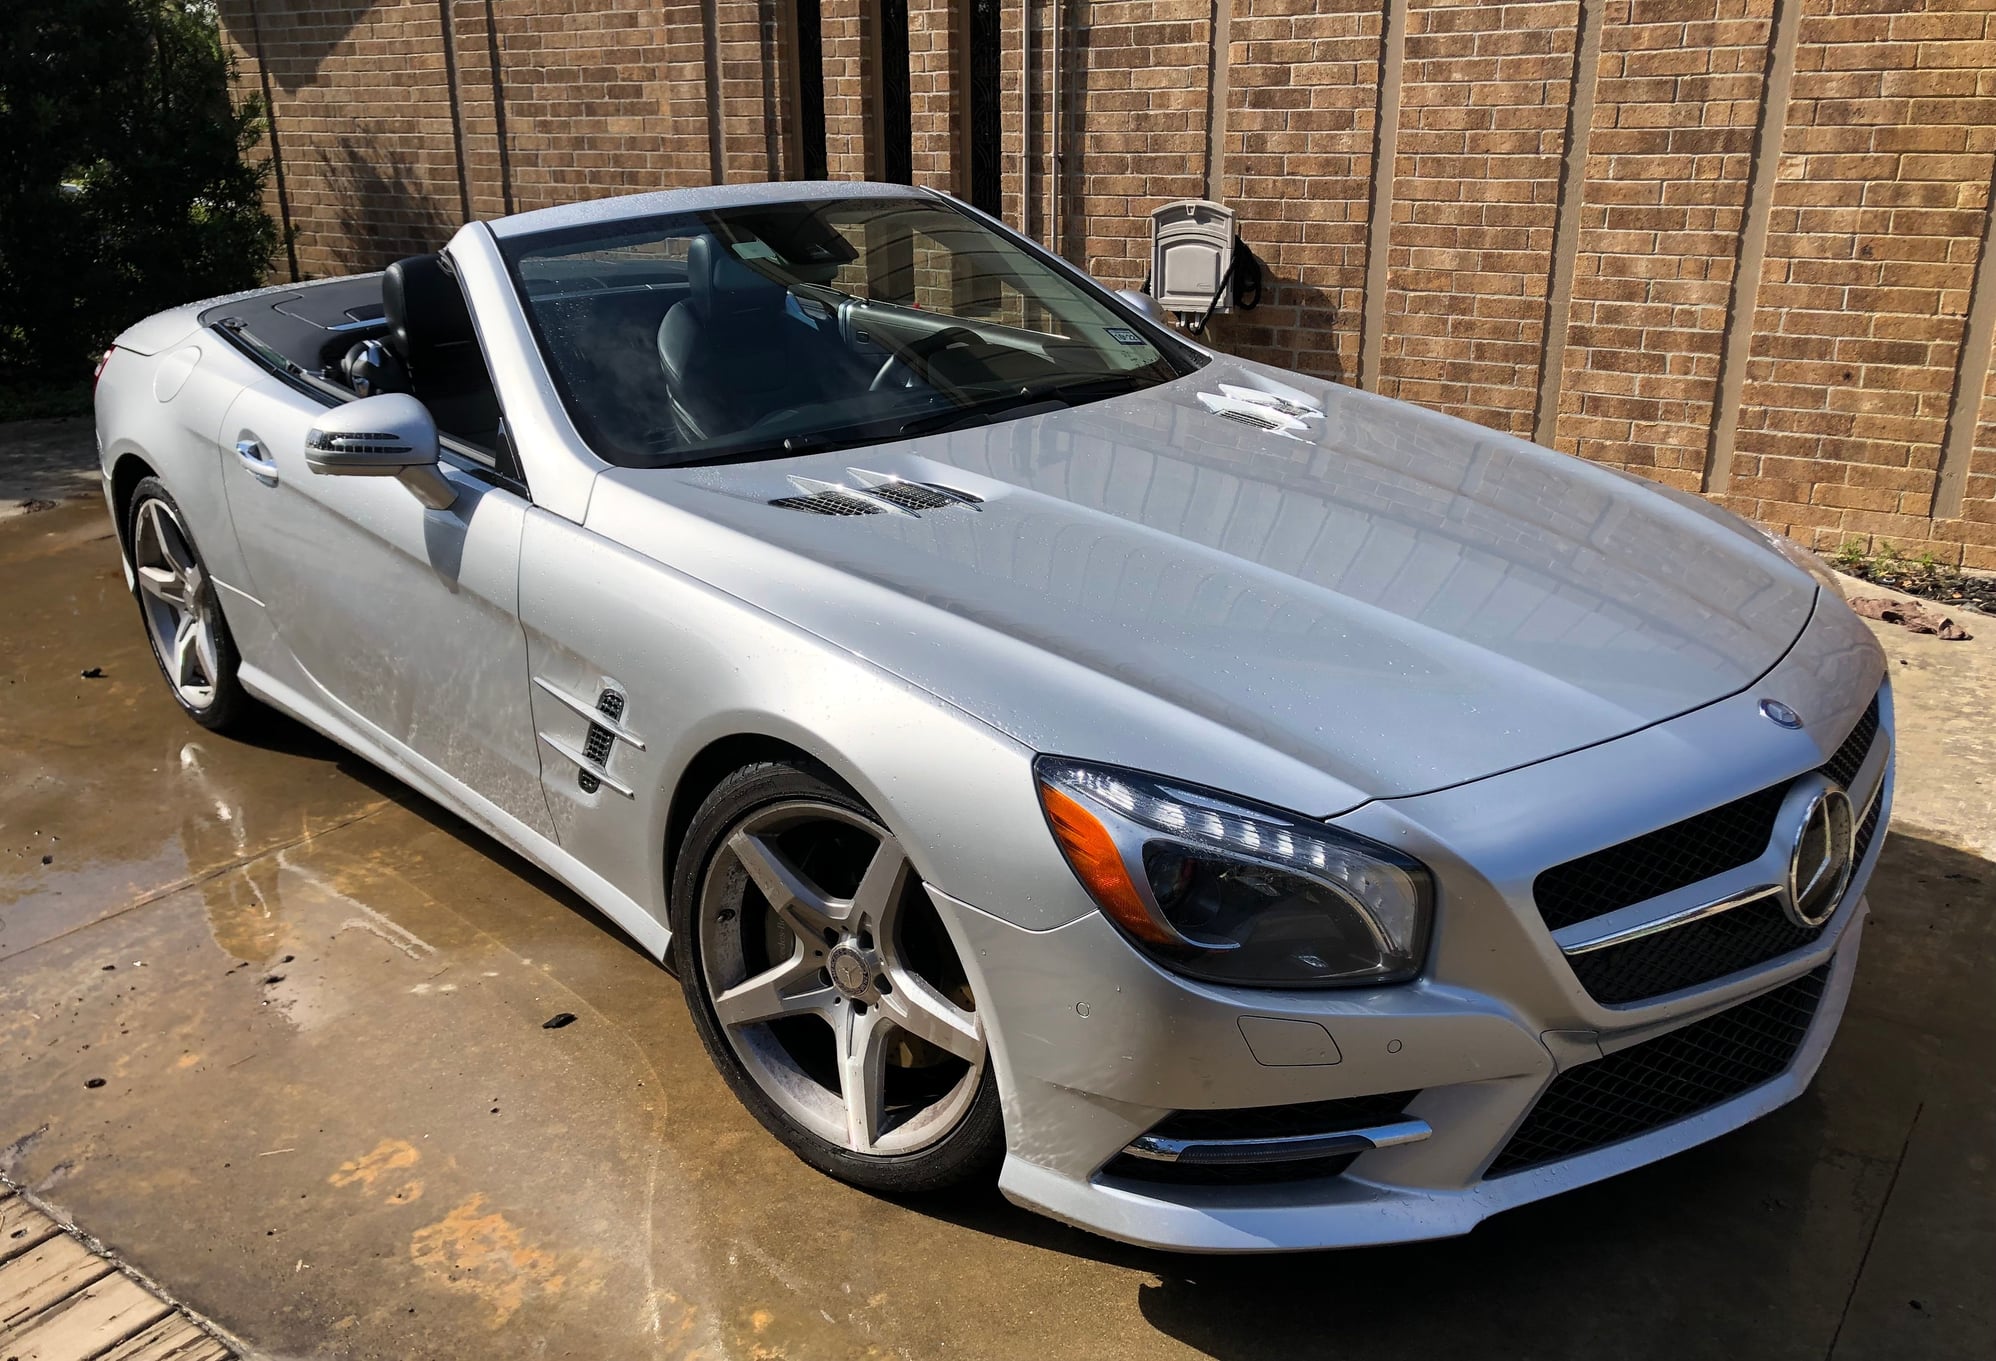 2013 Mercedes-Benz SL550 - The SL550 - Classic Hard top retractable roof - Used - VIN WDDJK7DA7DF016179 - 26,624 Miles - 8 cyl - Convertible - Silver - Houston, TX 77265, United States